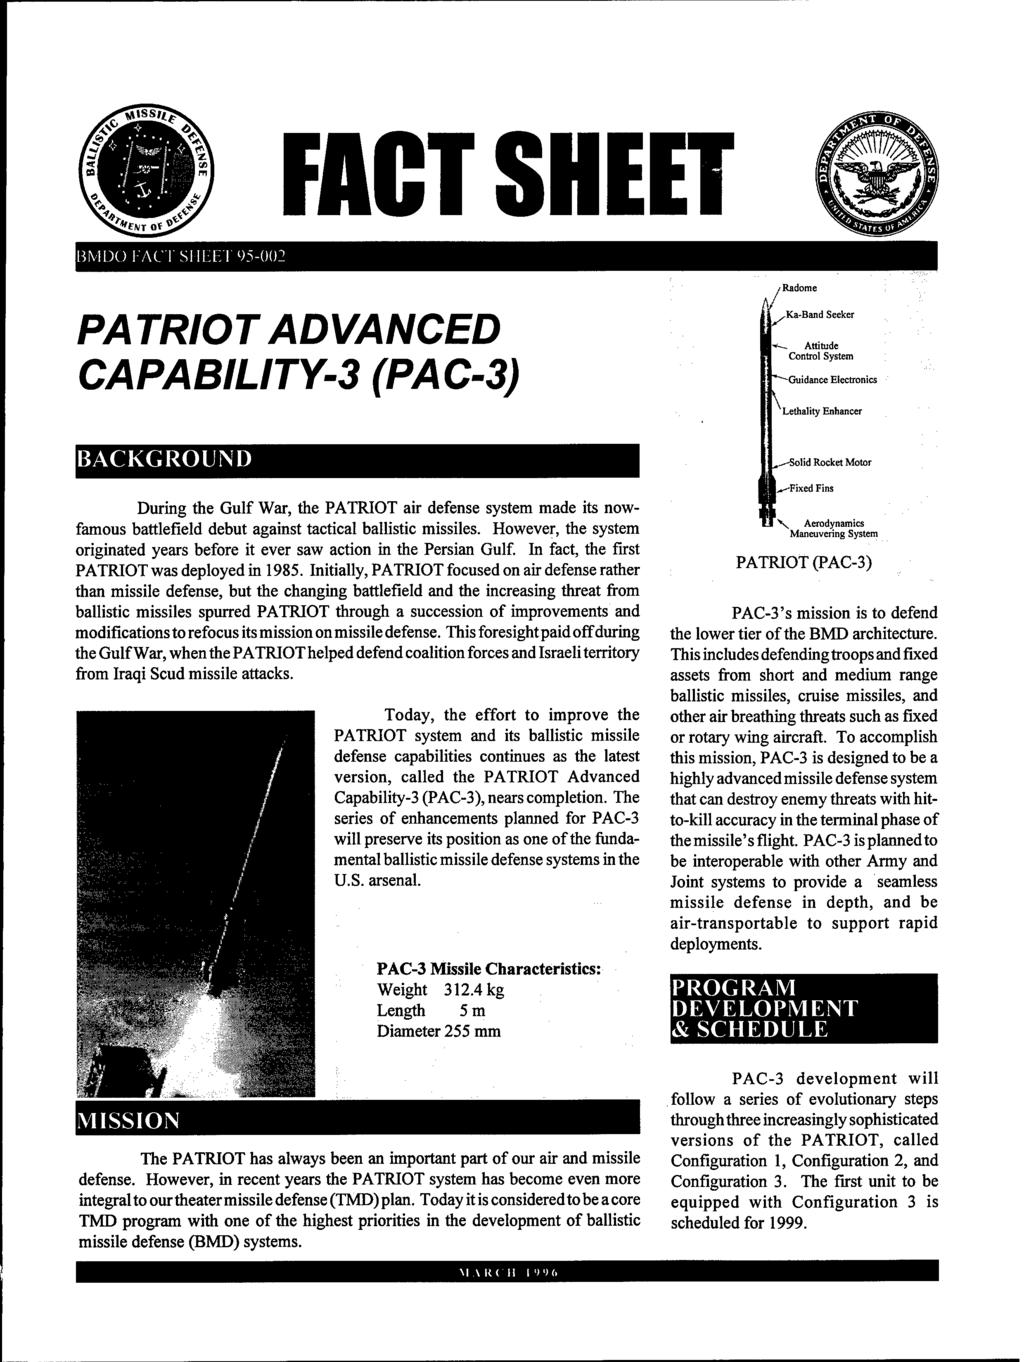 FACT SHEET PA TRIOT ADVANCED CAPABILITY-3 (PAC-3) BACKGROUND During the Gulf War, the PATRIOT air defense system made its nowfamous battlefield debut against tactical ballistic missiles.